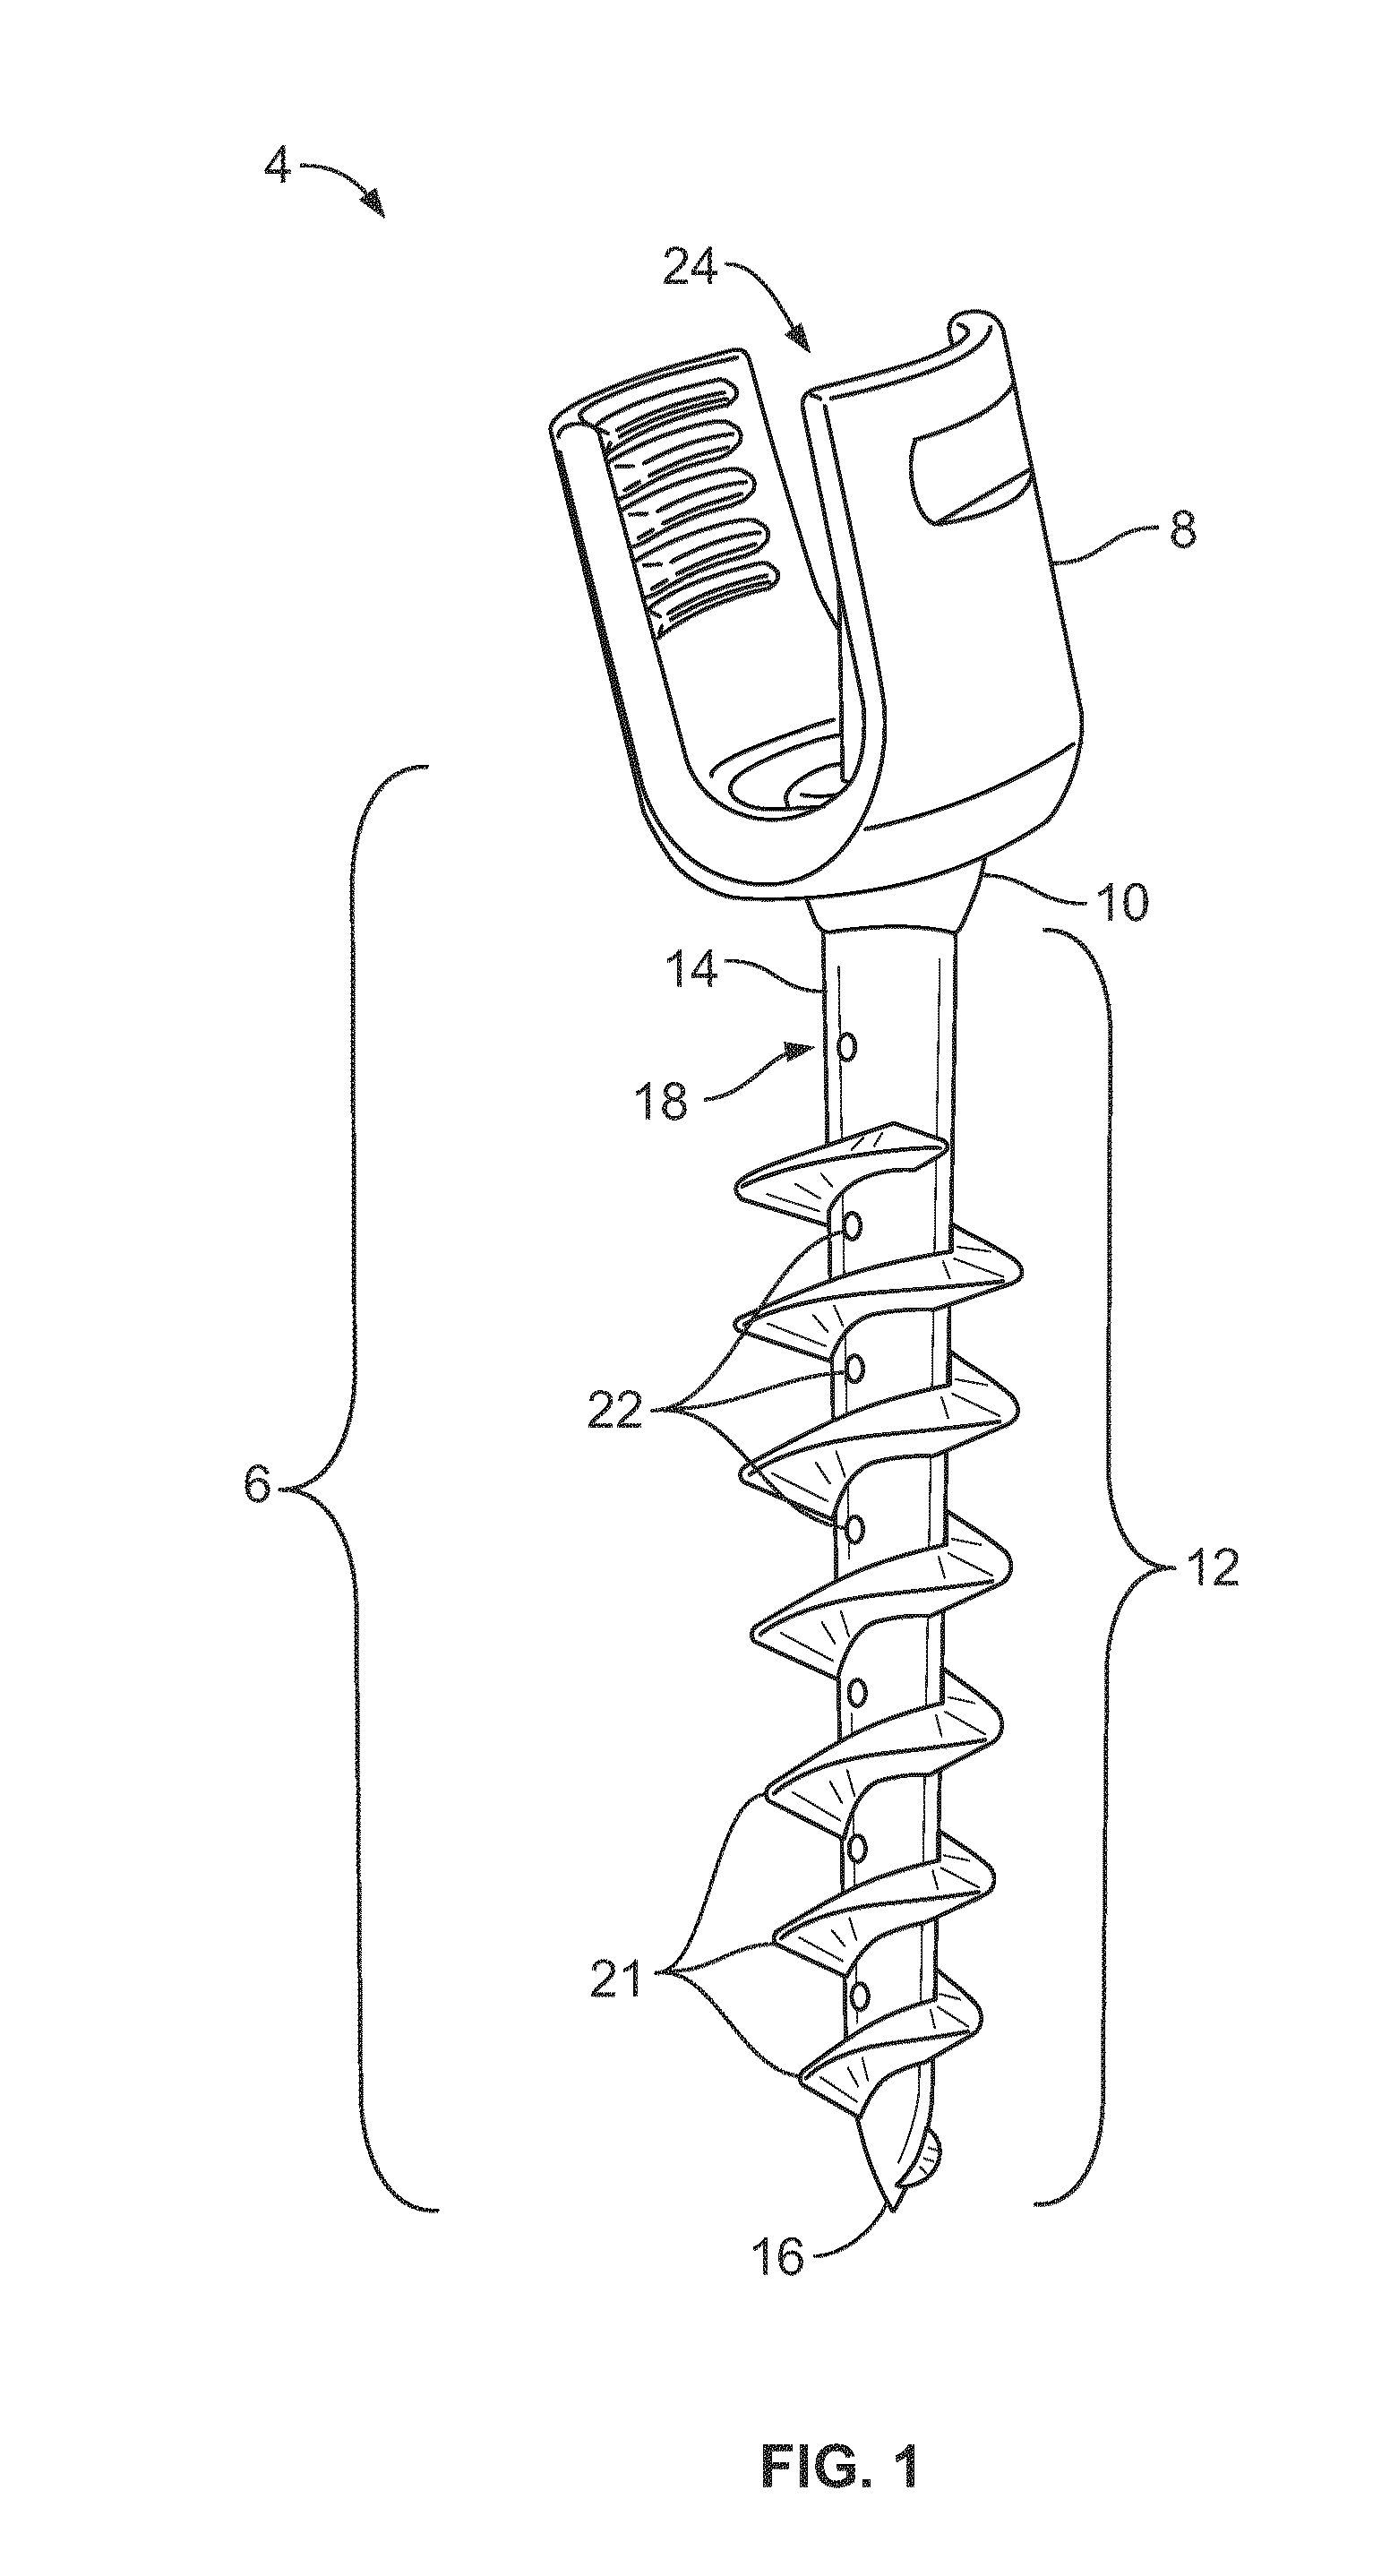 Composite Metal and Bone Orthopedic Fixation Devices